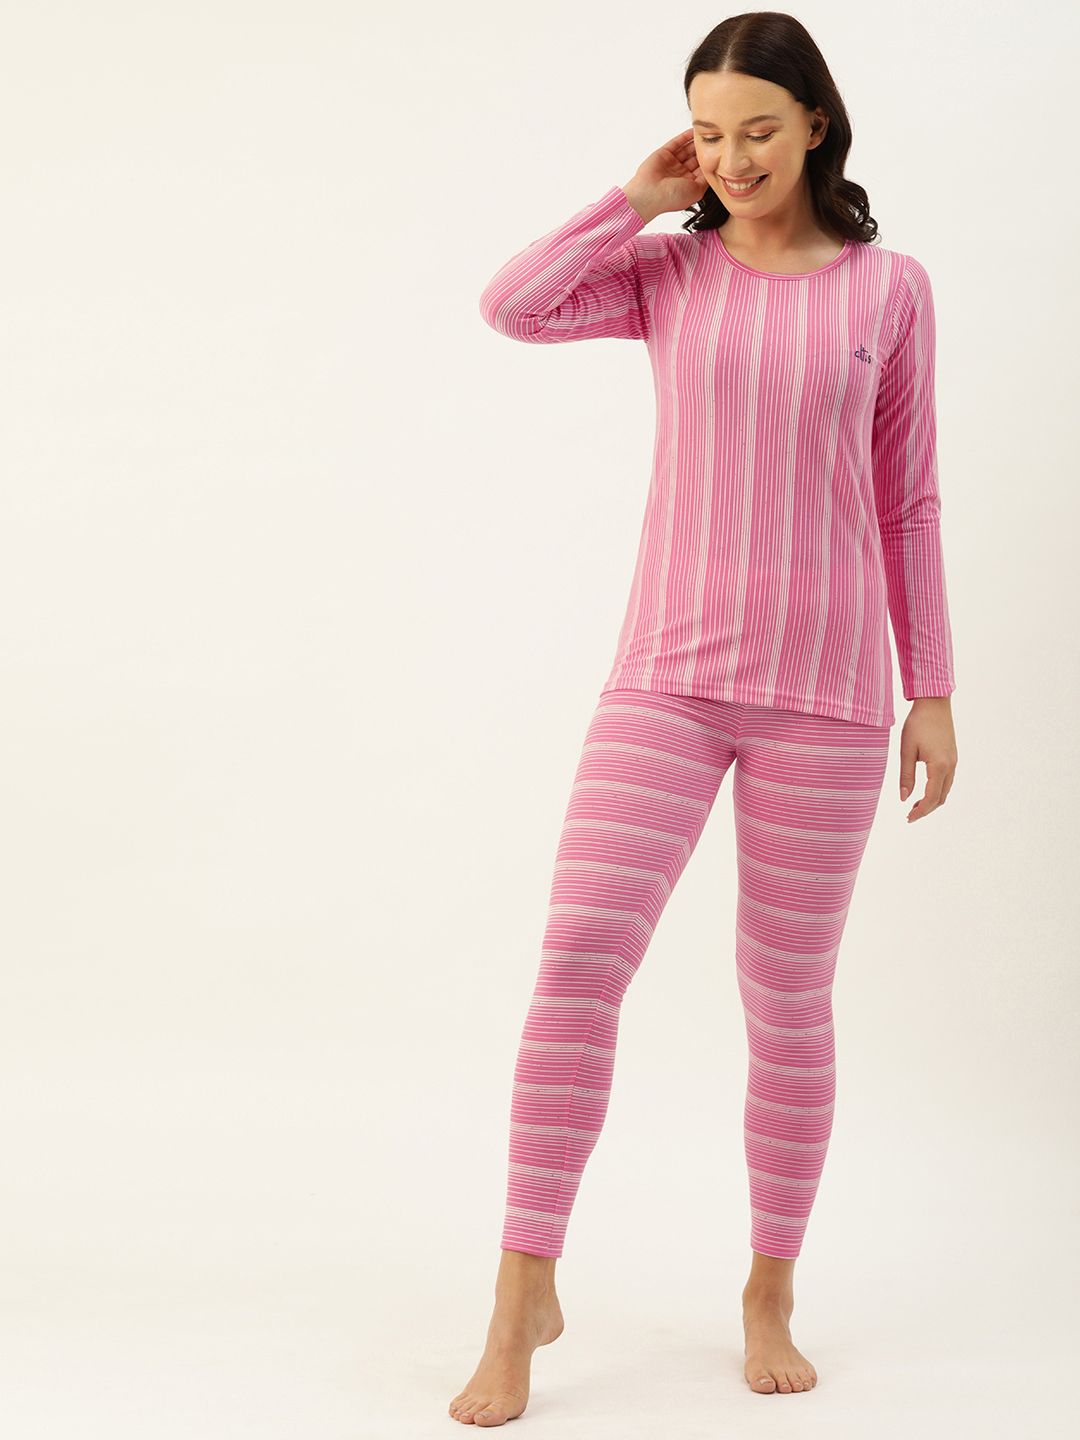 Clt.s Women Pink & White Striped Night suit Price in India